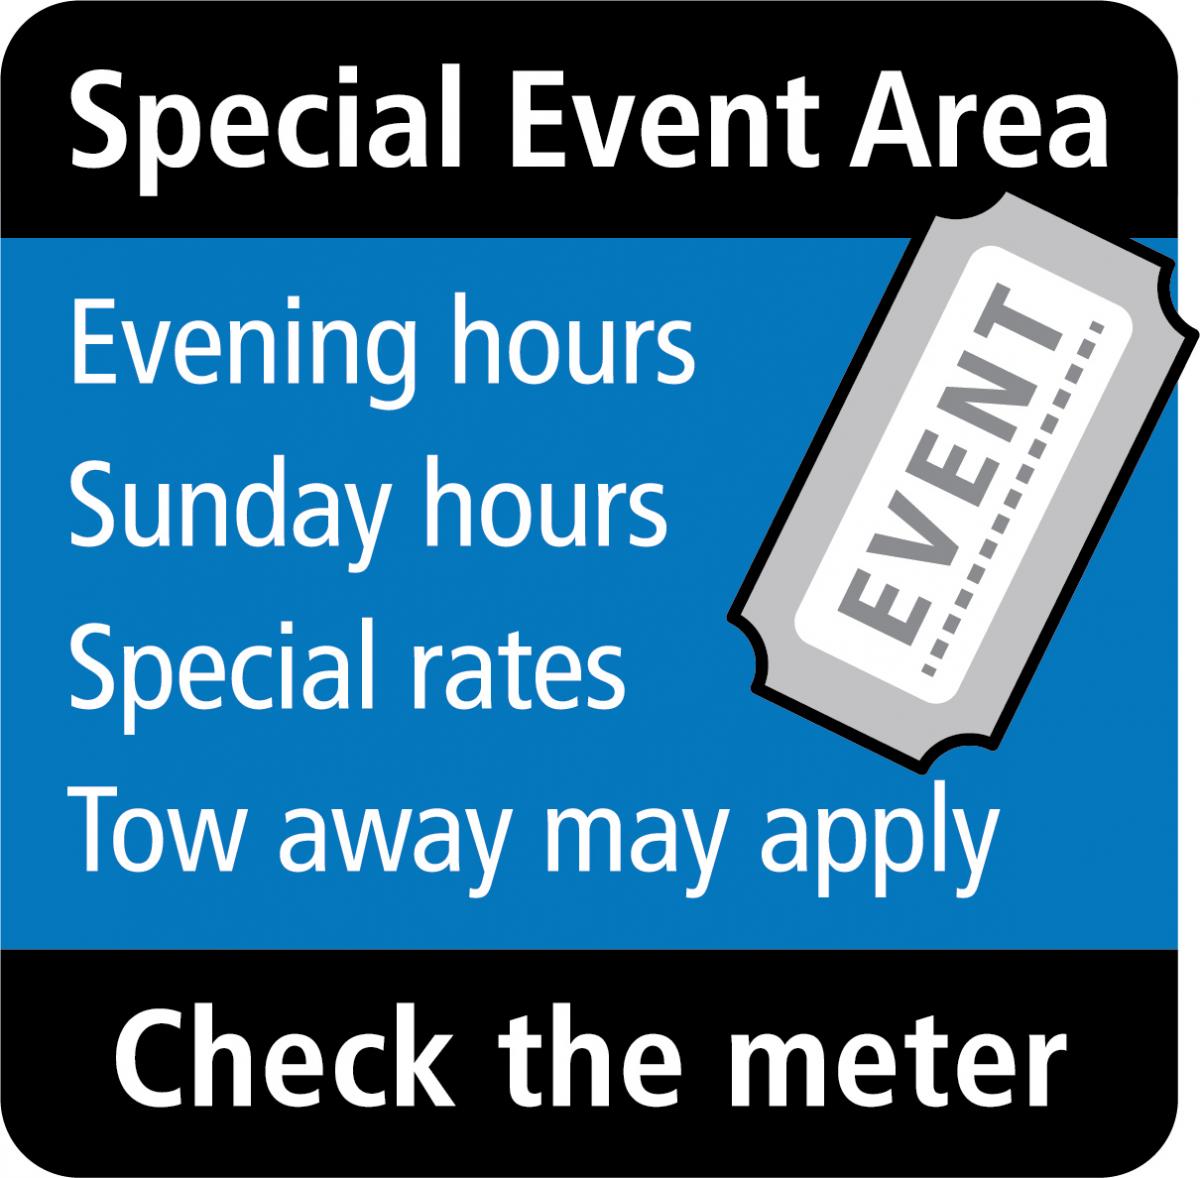 Special Event Parking sign that reads, "Special Event Area Evening hours Sunday hours Special rates Tow away may apply check the meter"